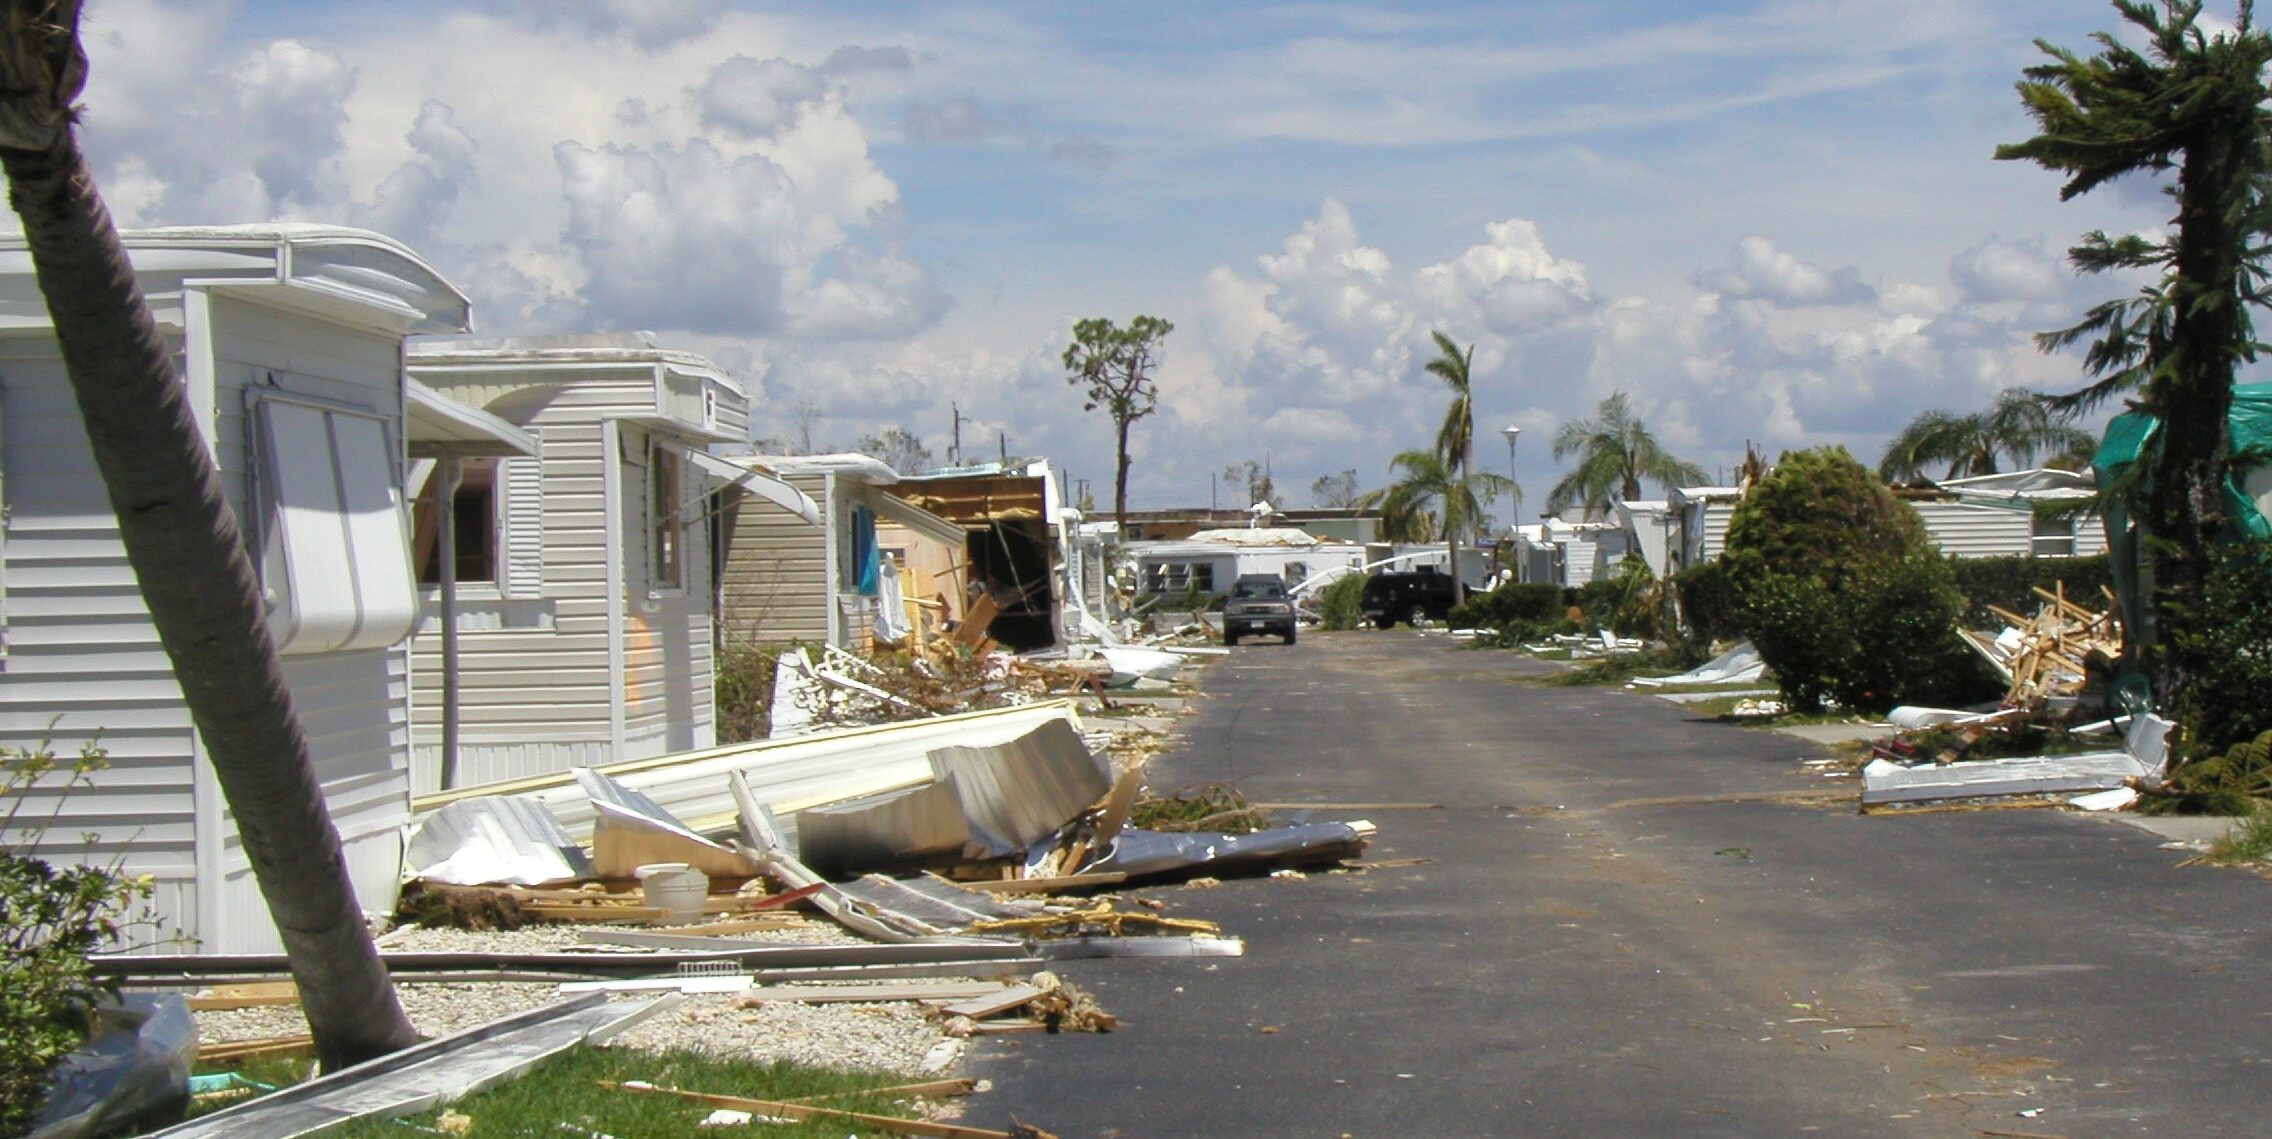 New Floridians Face El Nino Hurricane Season Amidst Explosive Growth, Highlights Importance of Renewed Emphasis on Disaster Preparedness